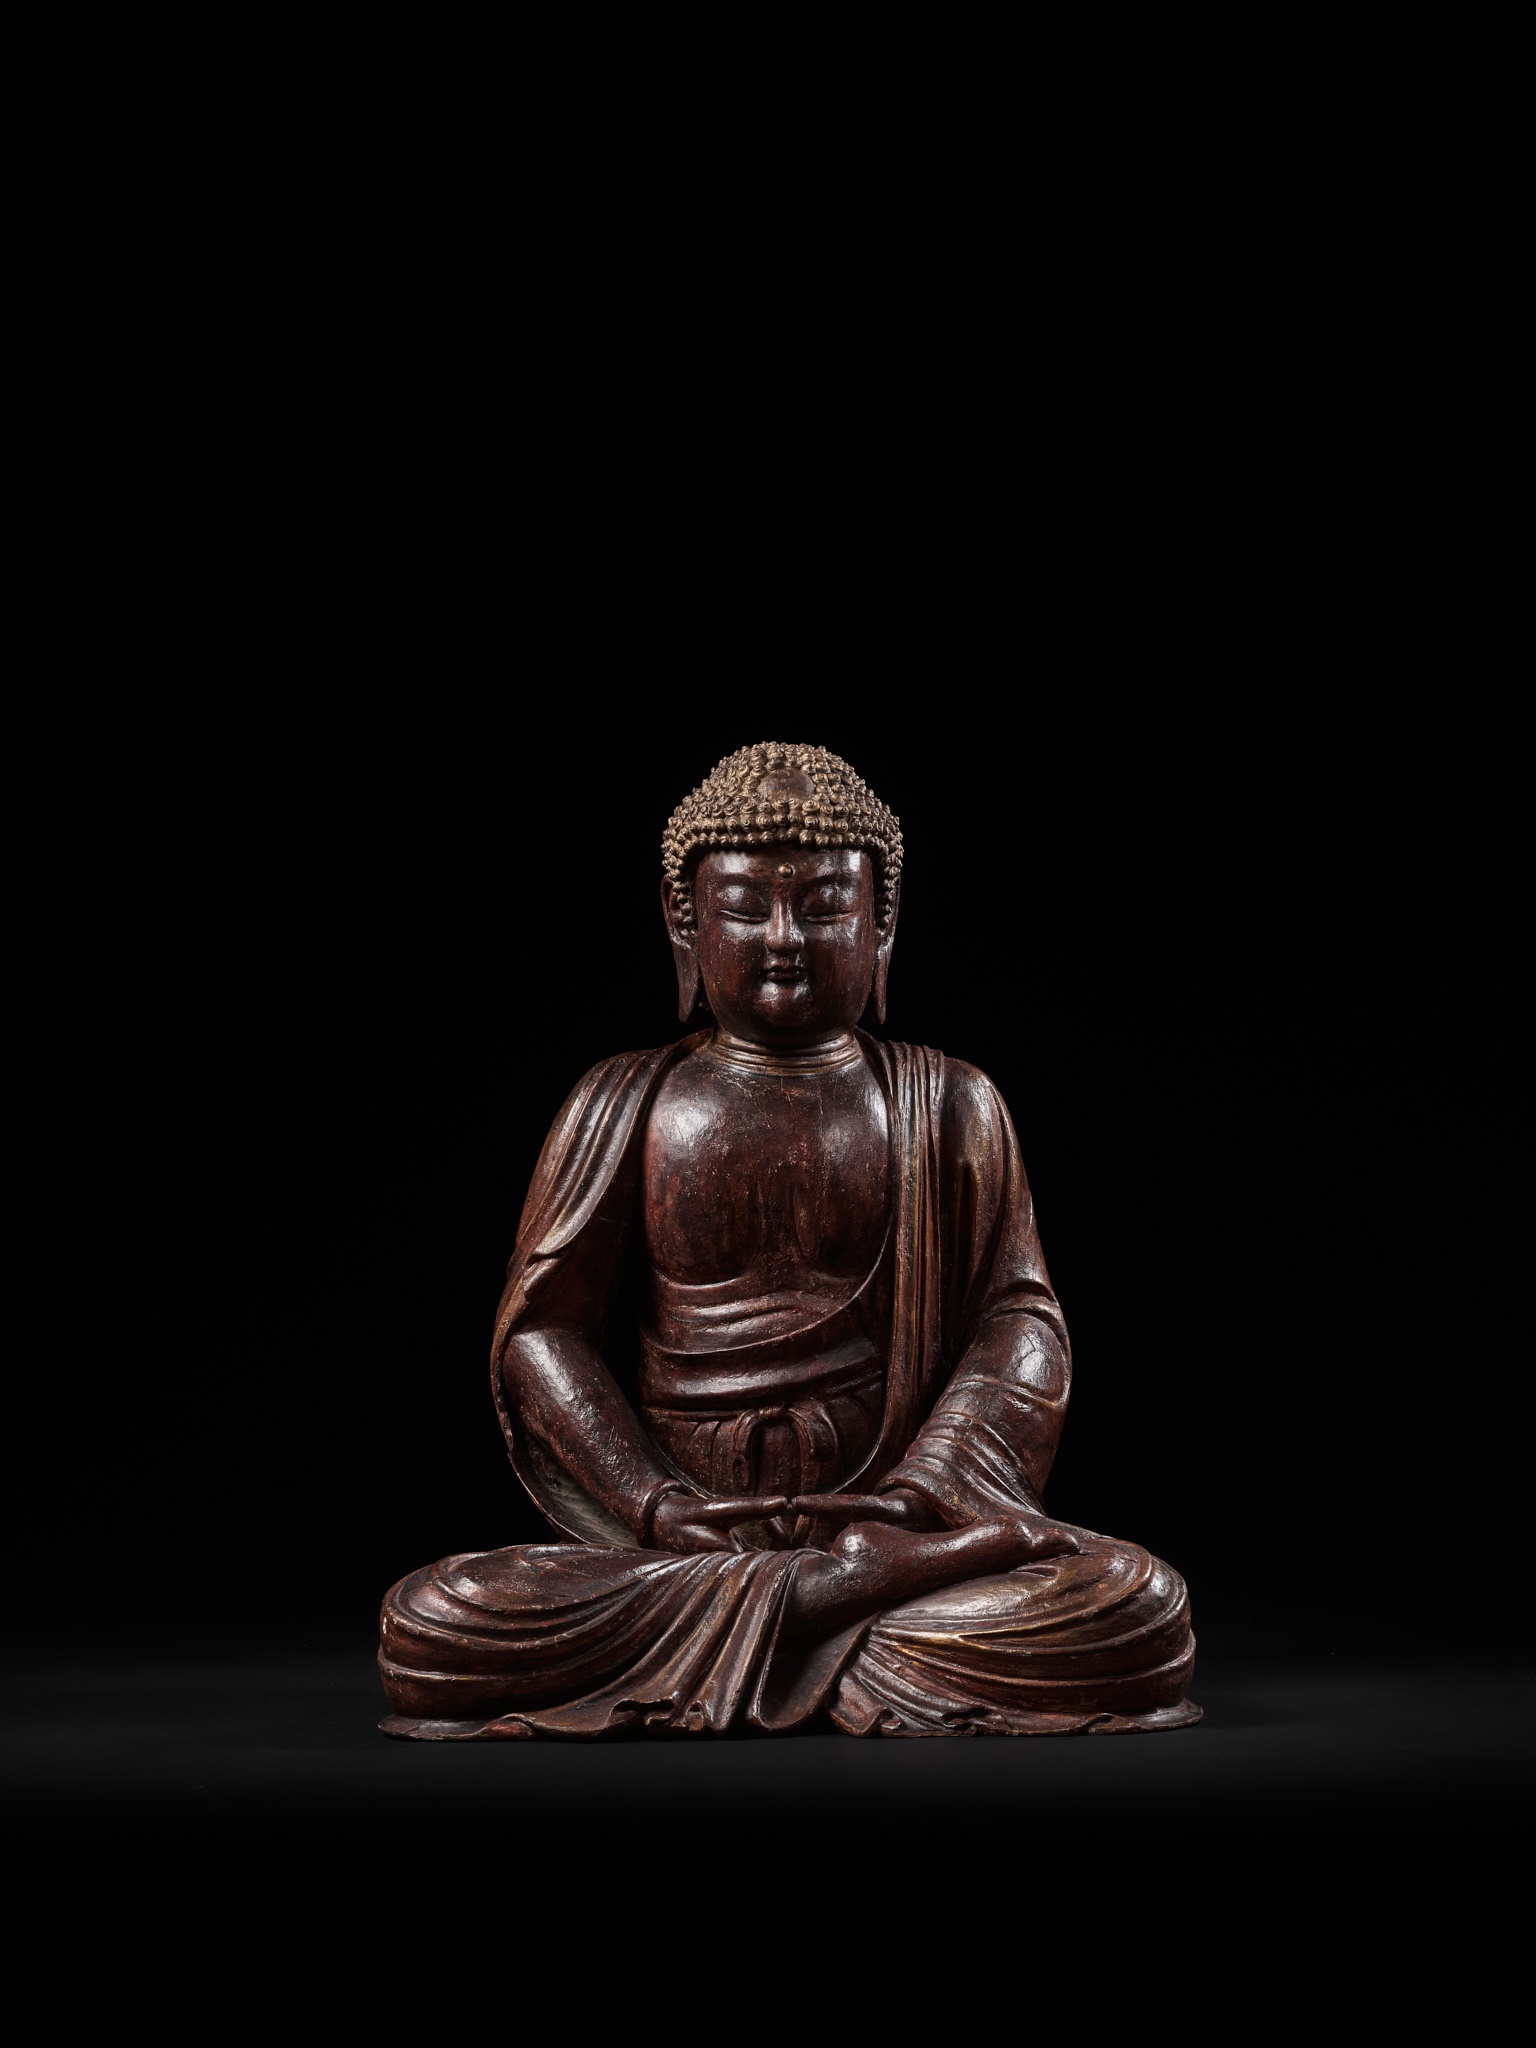 A LARGE LACQUERED WOOD FIGURE OF BUDDHA, LATE MING/EARLY QING DYNASTY, CIRCA 17TH CENTURY - Image 3 of 9